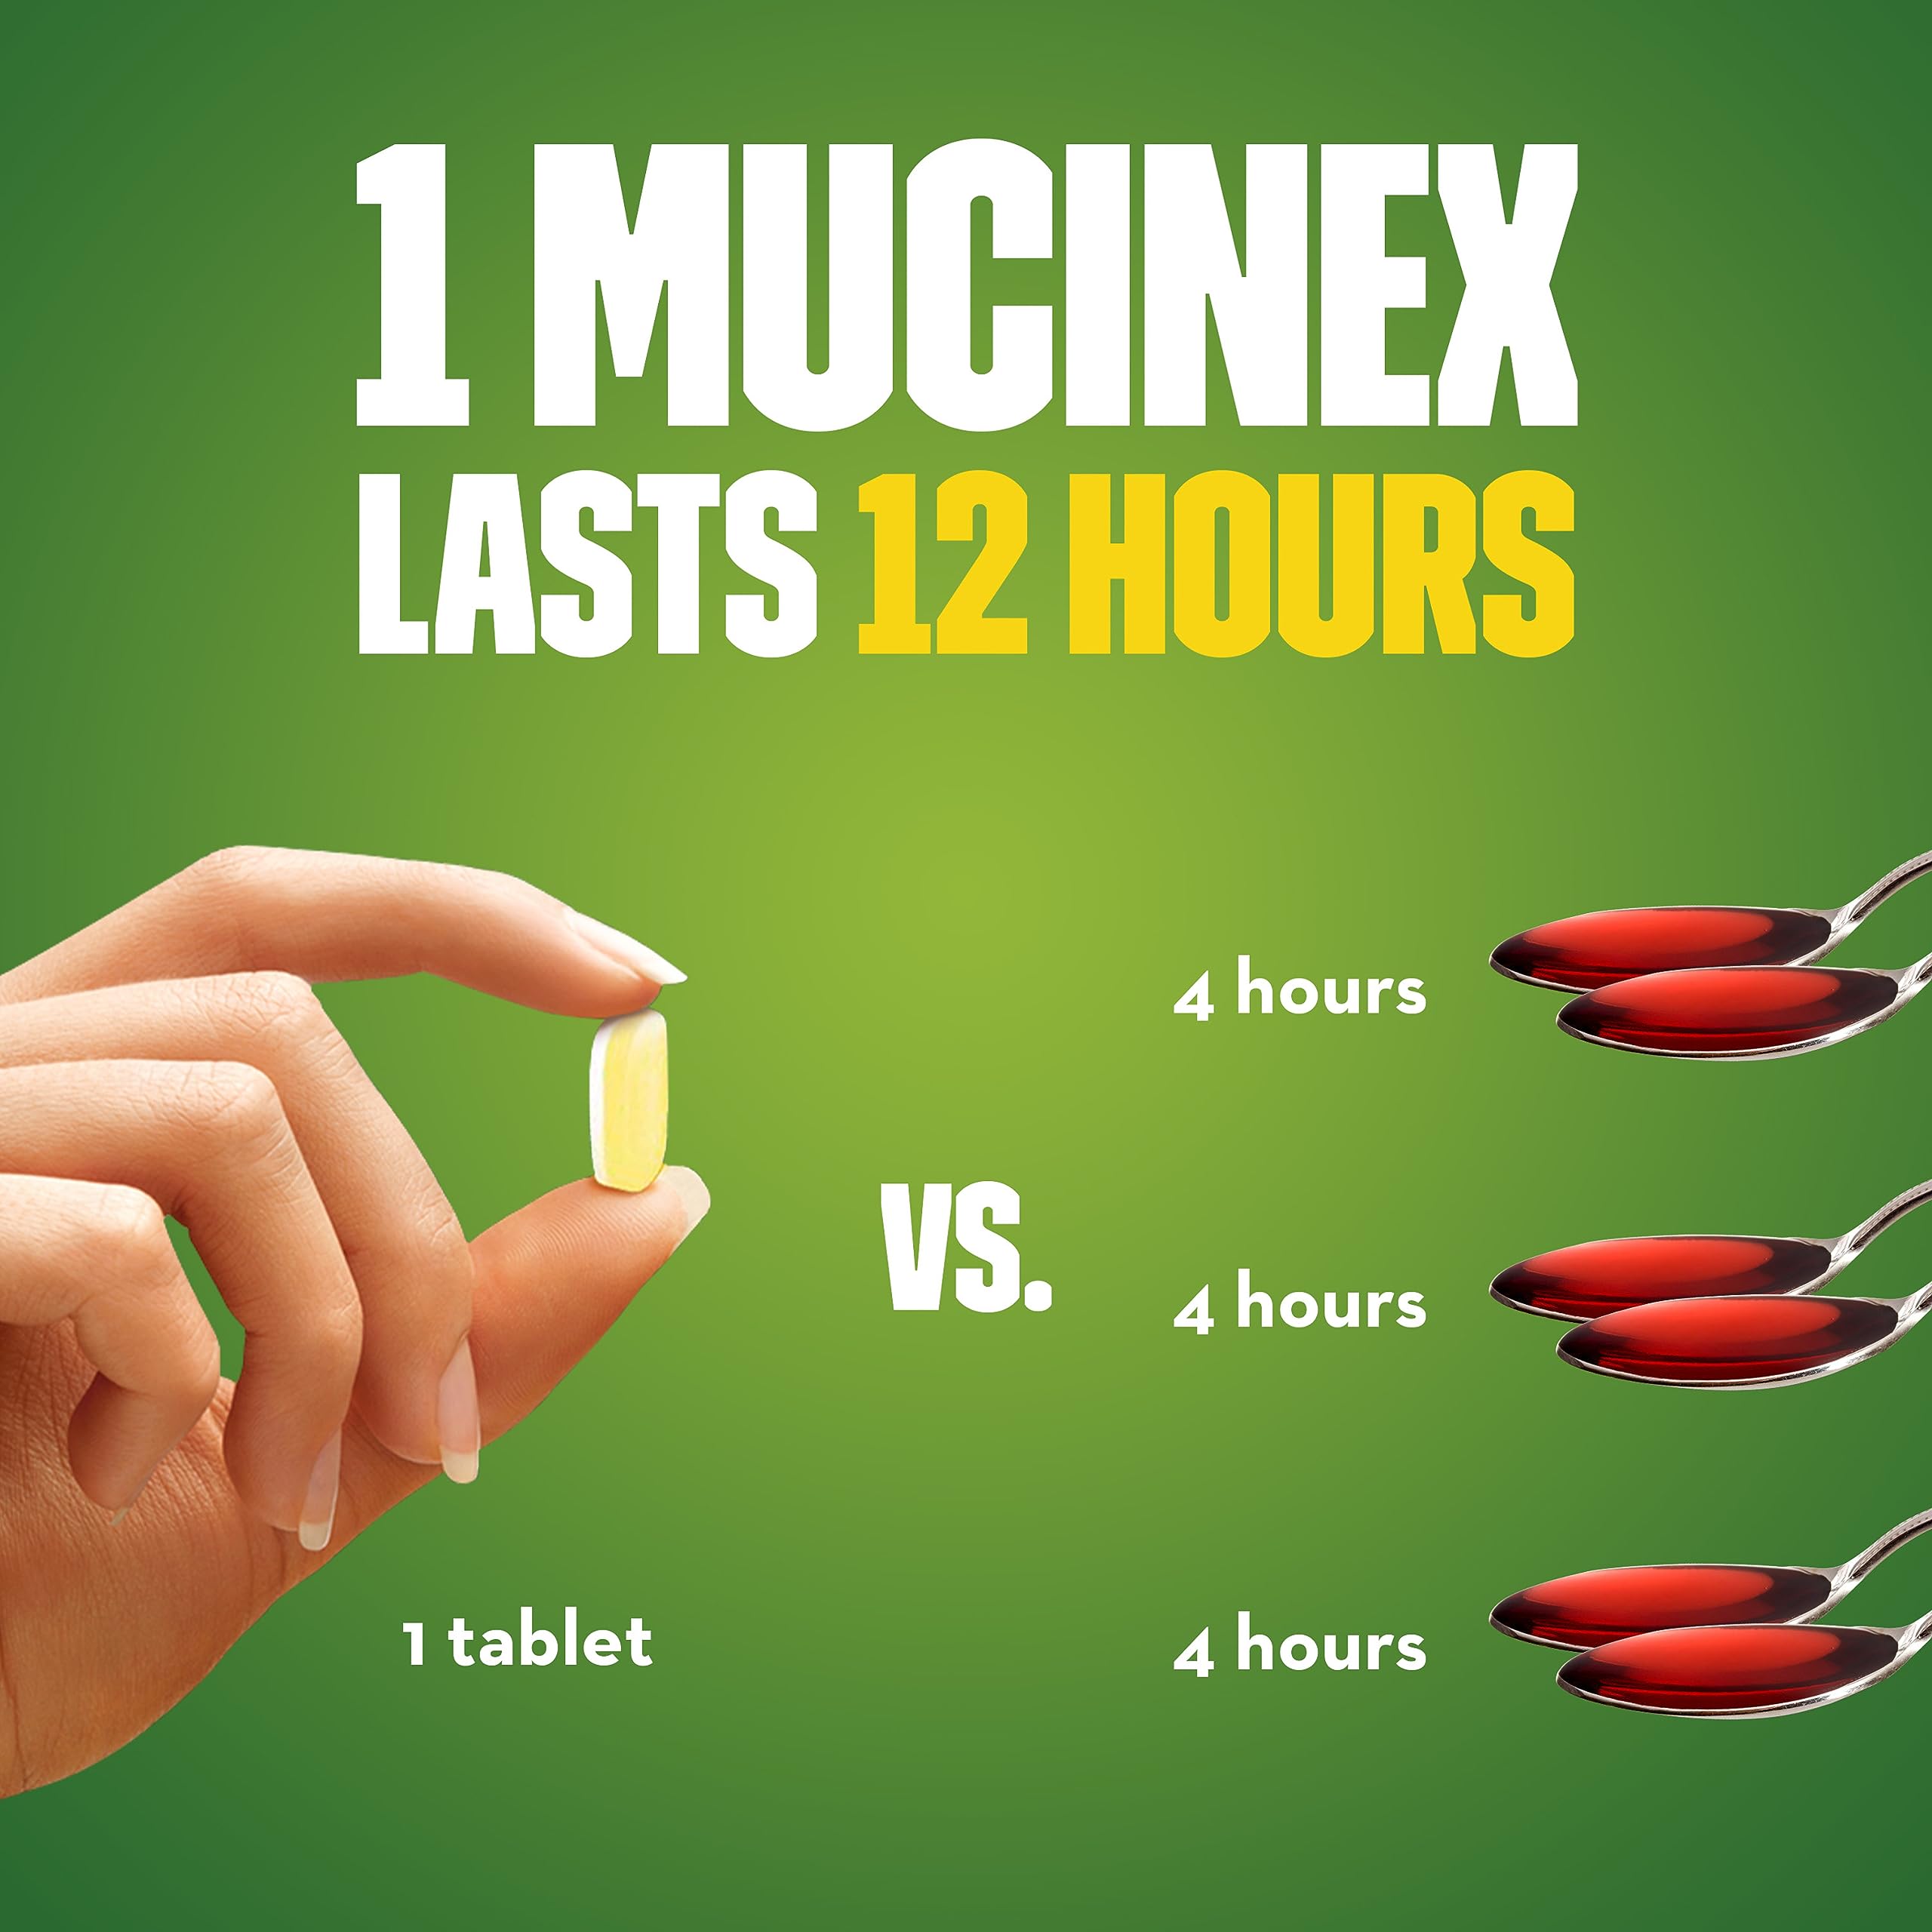 Mucinex DM 12 Hr Expectorant & Cough Suppressant Tablets, one 500 Count Bottle, Powerful Symptom Relief, Lasts up to 12 Hours, Multi, 17.637 Oz